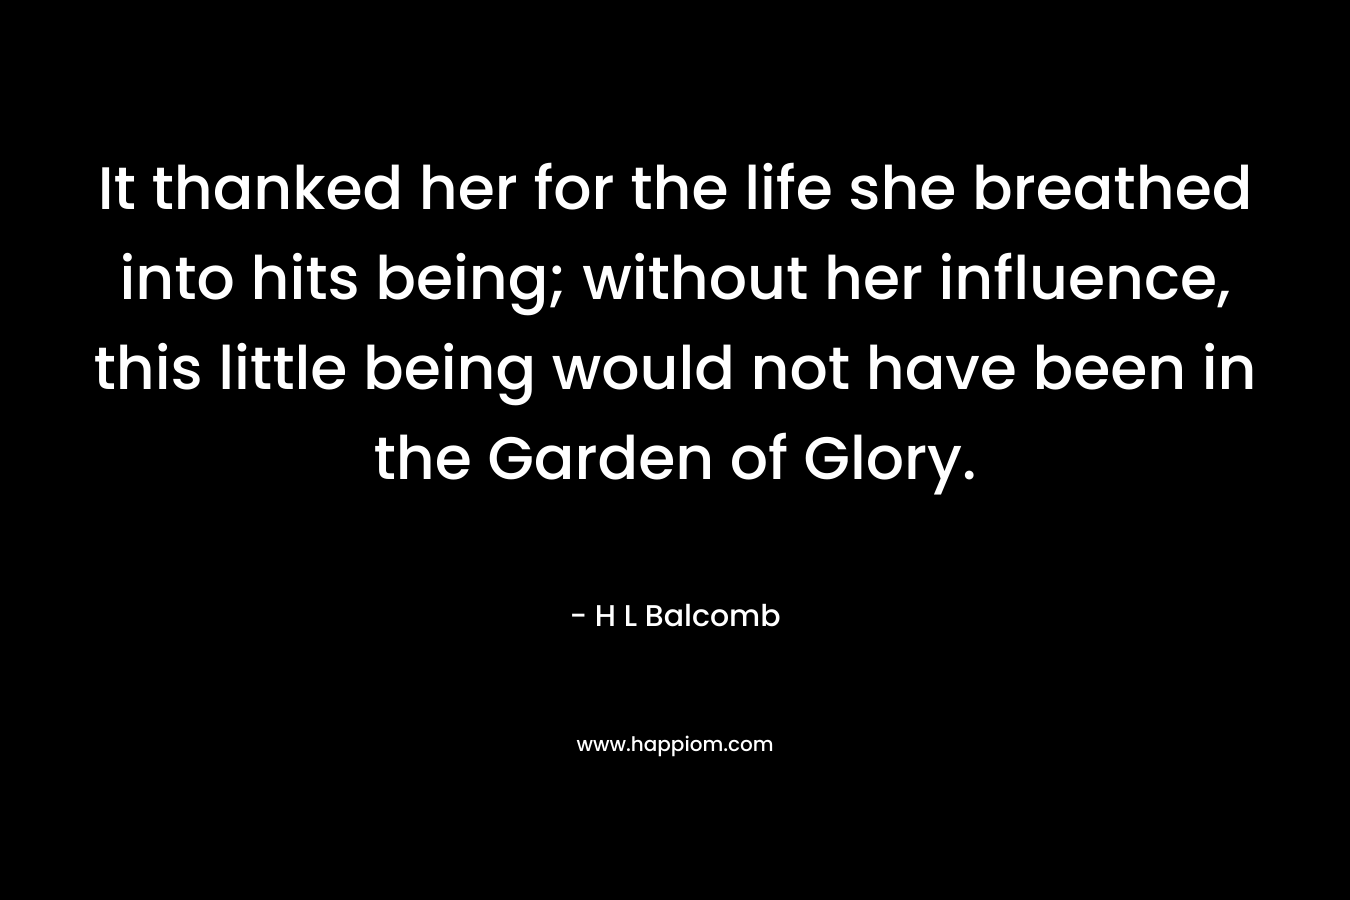 It thanked her for the life she breathed into hits being; without her influence, this little being would not have been in the Garden of Glory.